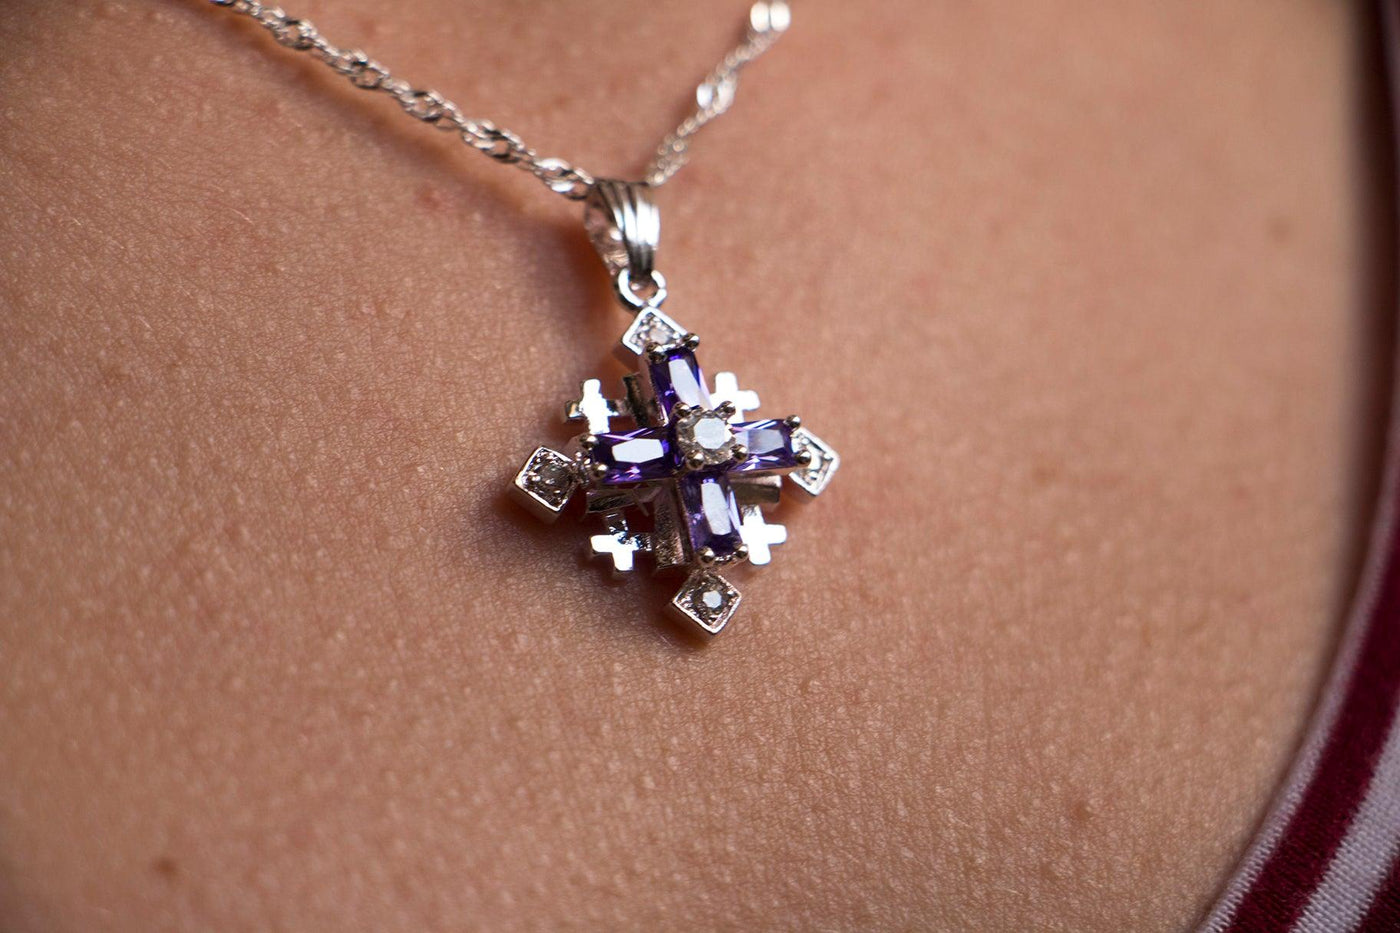 Copy of Jerusalem Cross Silver Pendant with Purple Colors Crystals + Silver Necklace - Spring Nahal